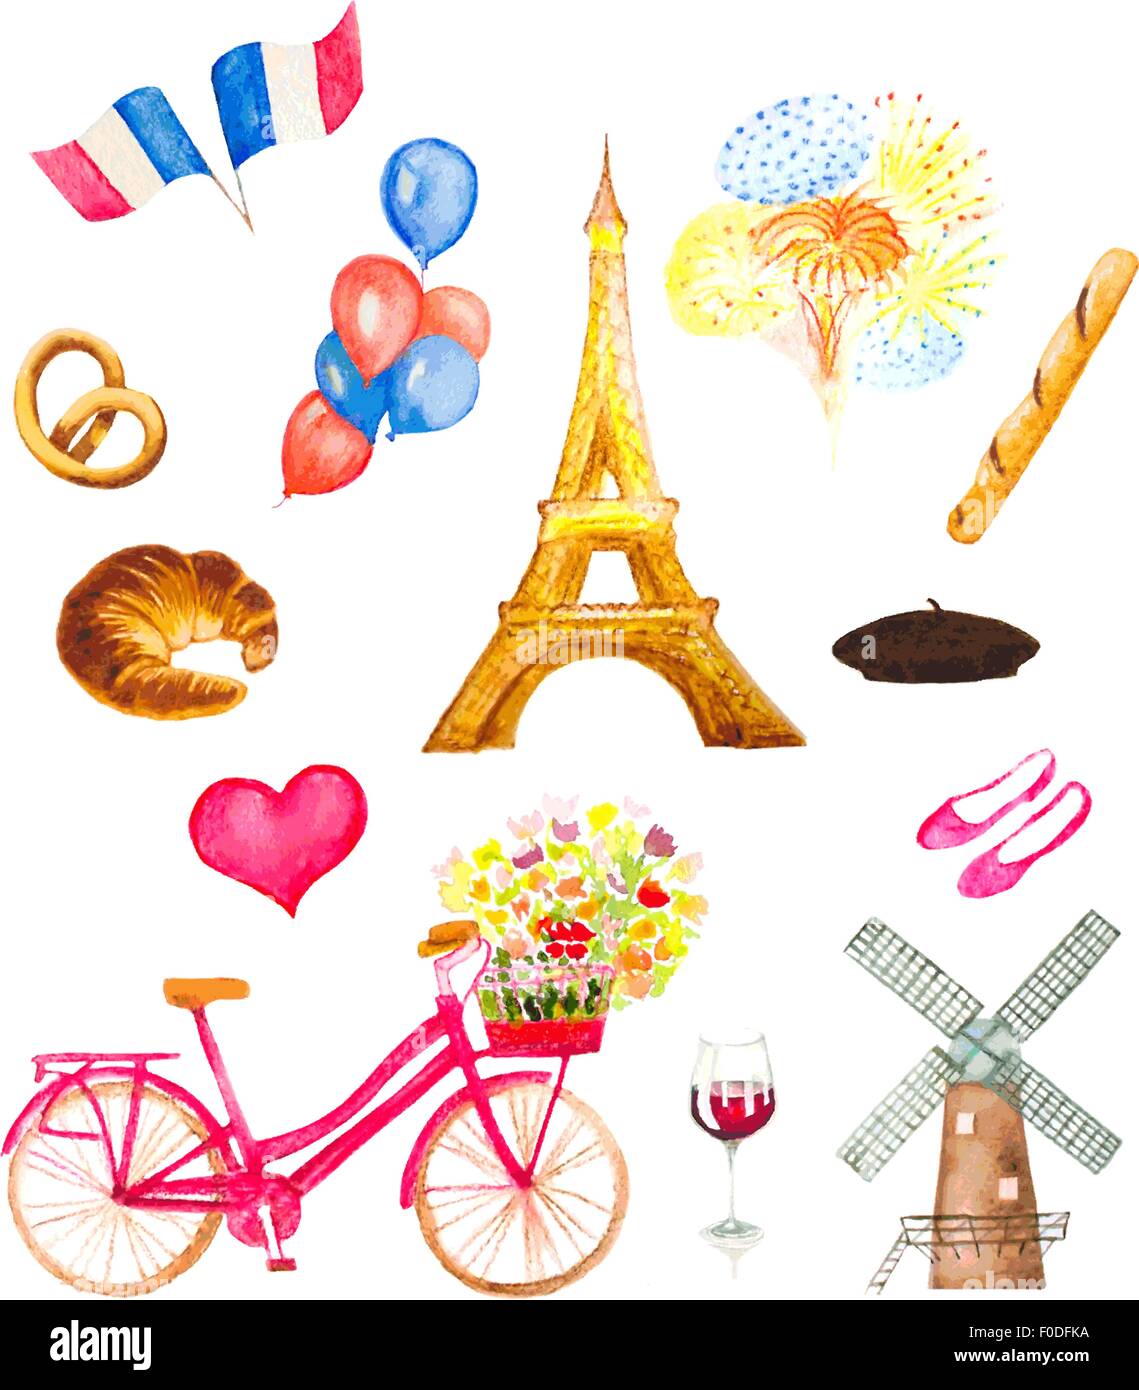 watercolor paris icons vector illustration. eiffel tower, bicycle with flowers, balloons, flags, fireworks and bakery mill Stock Vector